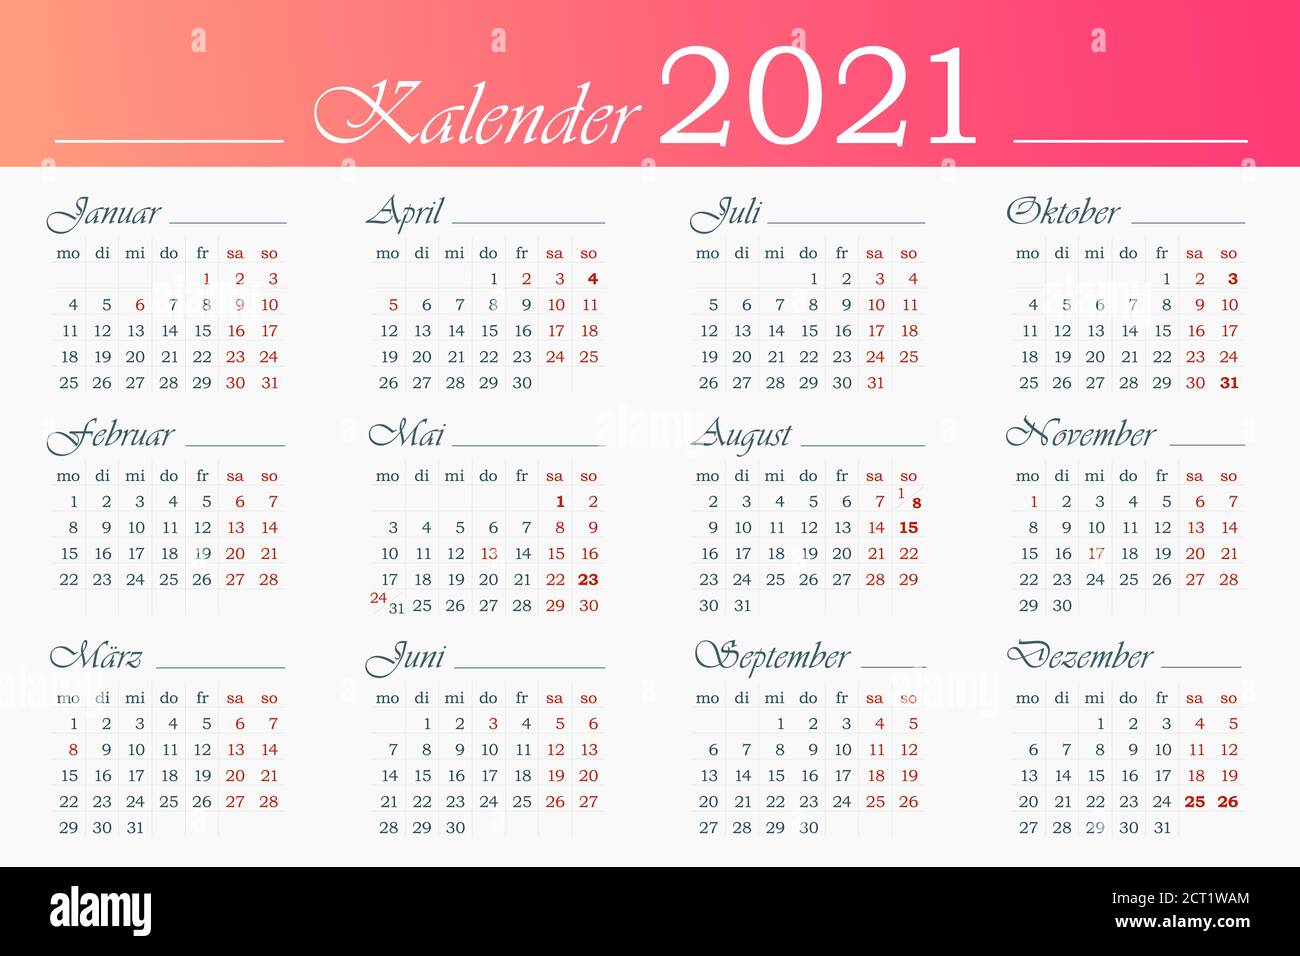 Calendar 2021 Template In German 12 Months With Highlighted Holiday Events Week Starts On Monday Horizontal Vector Editable Calendar Design Stock Vector Image Art Alamy